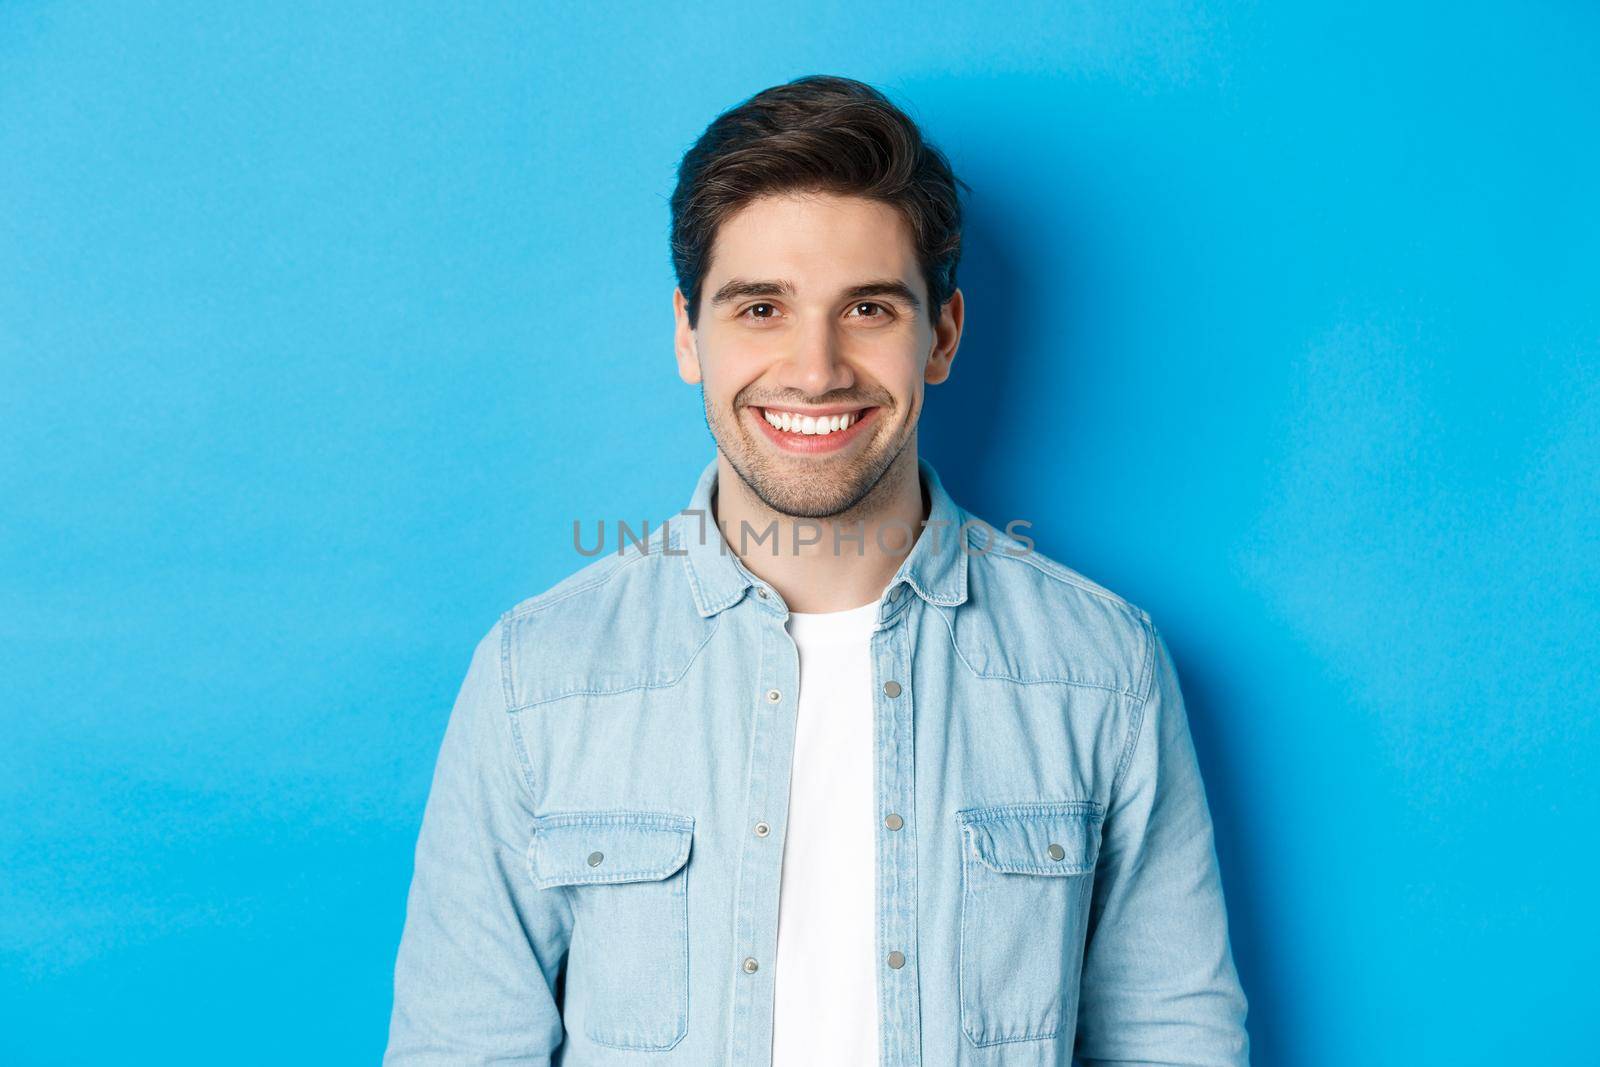 Close-up of young successful man smiling at camera, standing in casual outfit against blue background.